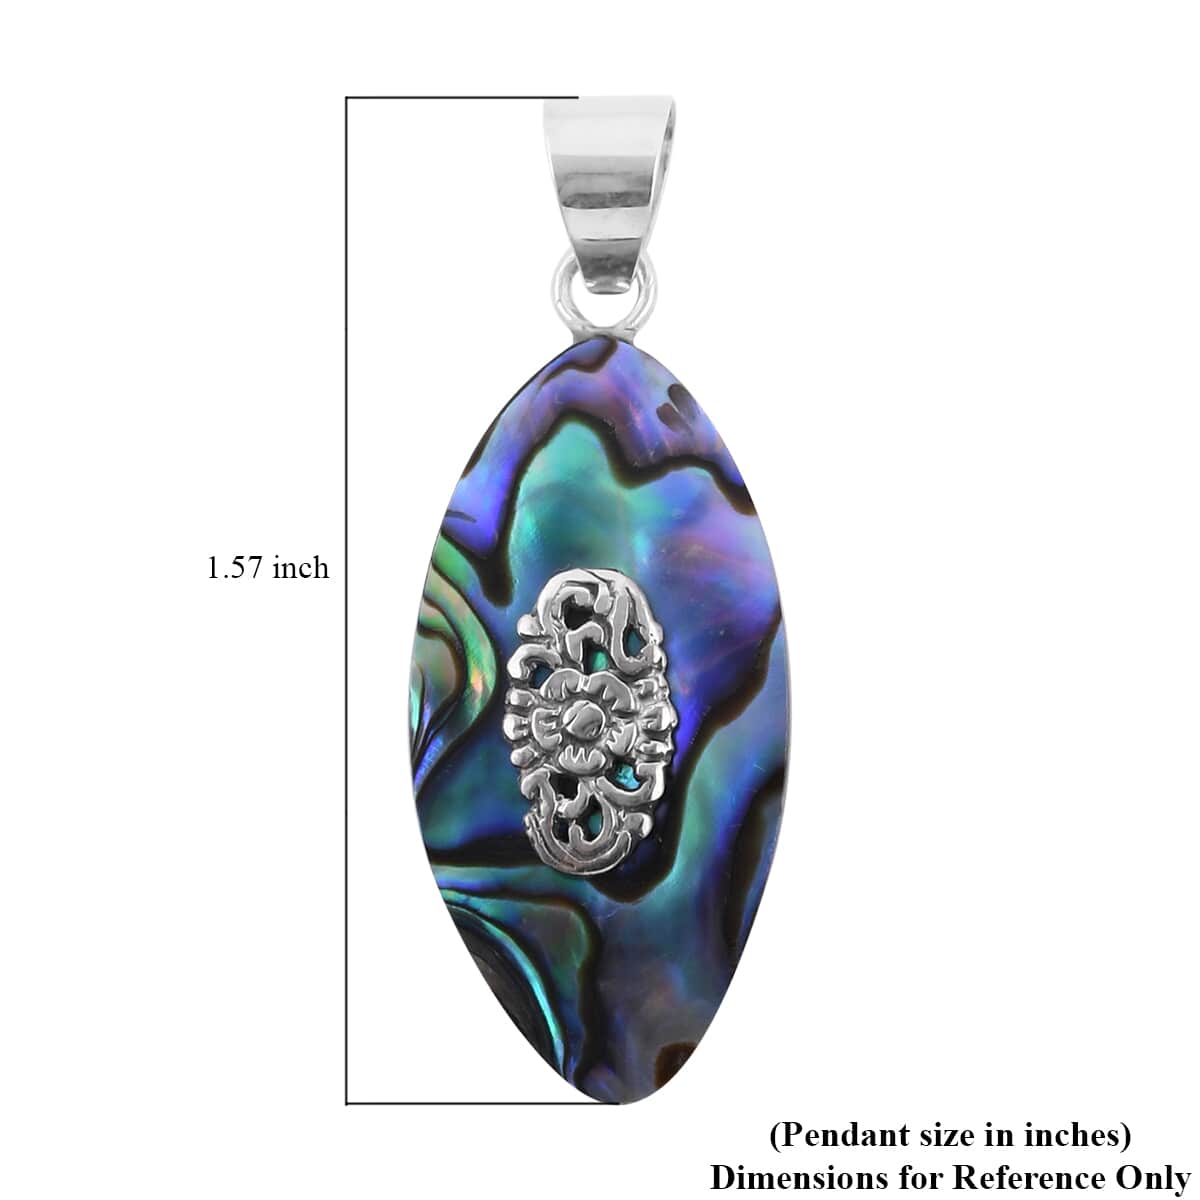 Abalone Shell Pendant in Sterling Silver image number 4